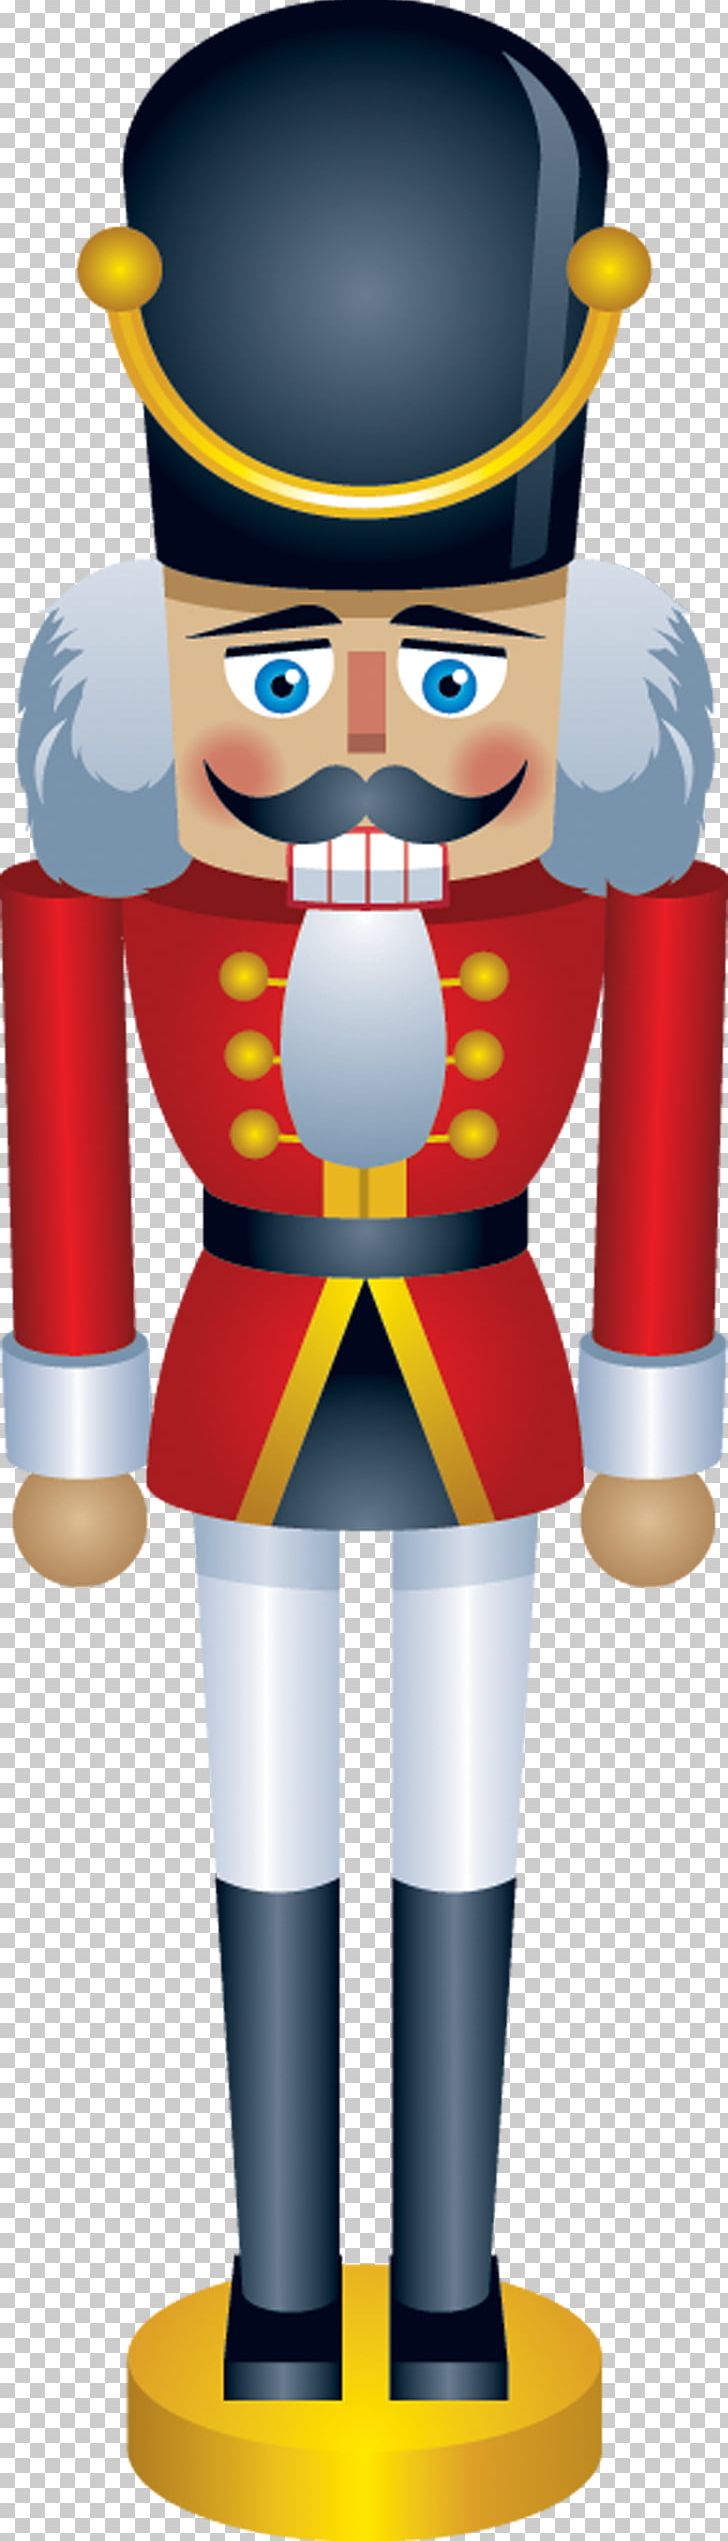 The Nutcracker And The Mouse King Nutcracker Doll PNG, Clipart, Ballet, Cartoon, Choreography, Christmas, Decorative Nutcracker Free PNG Download